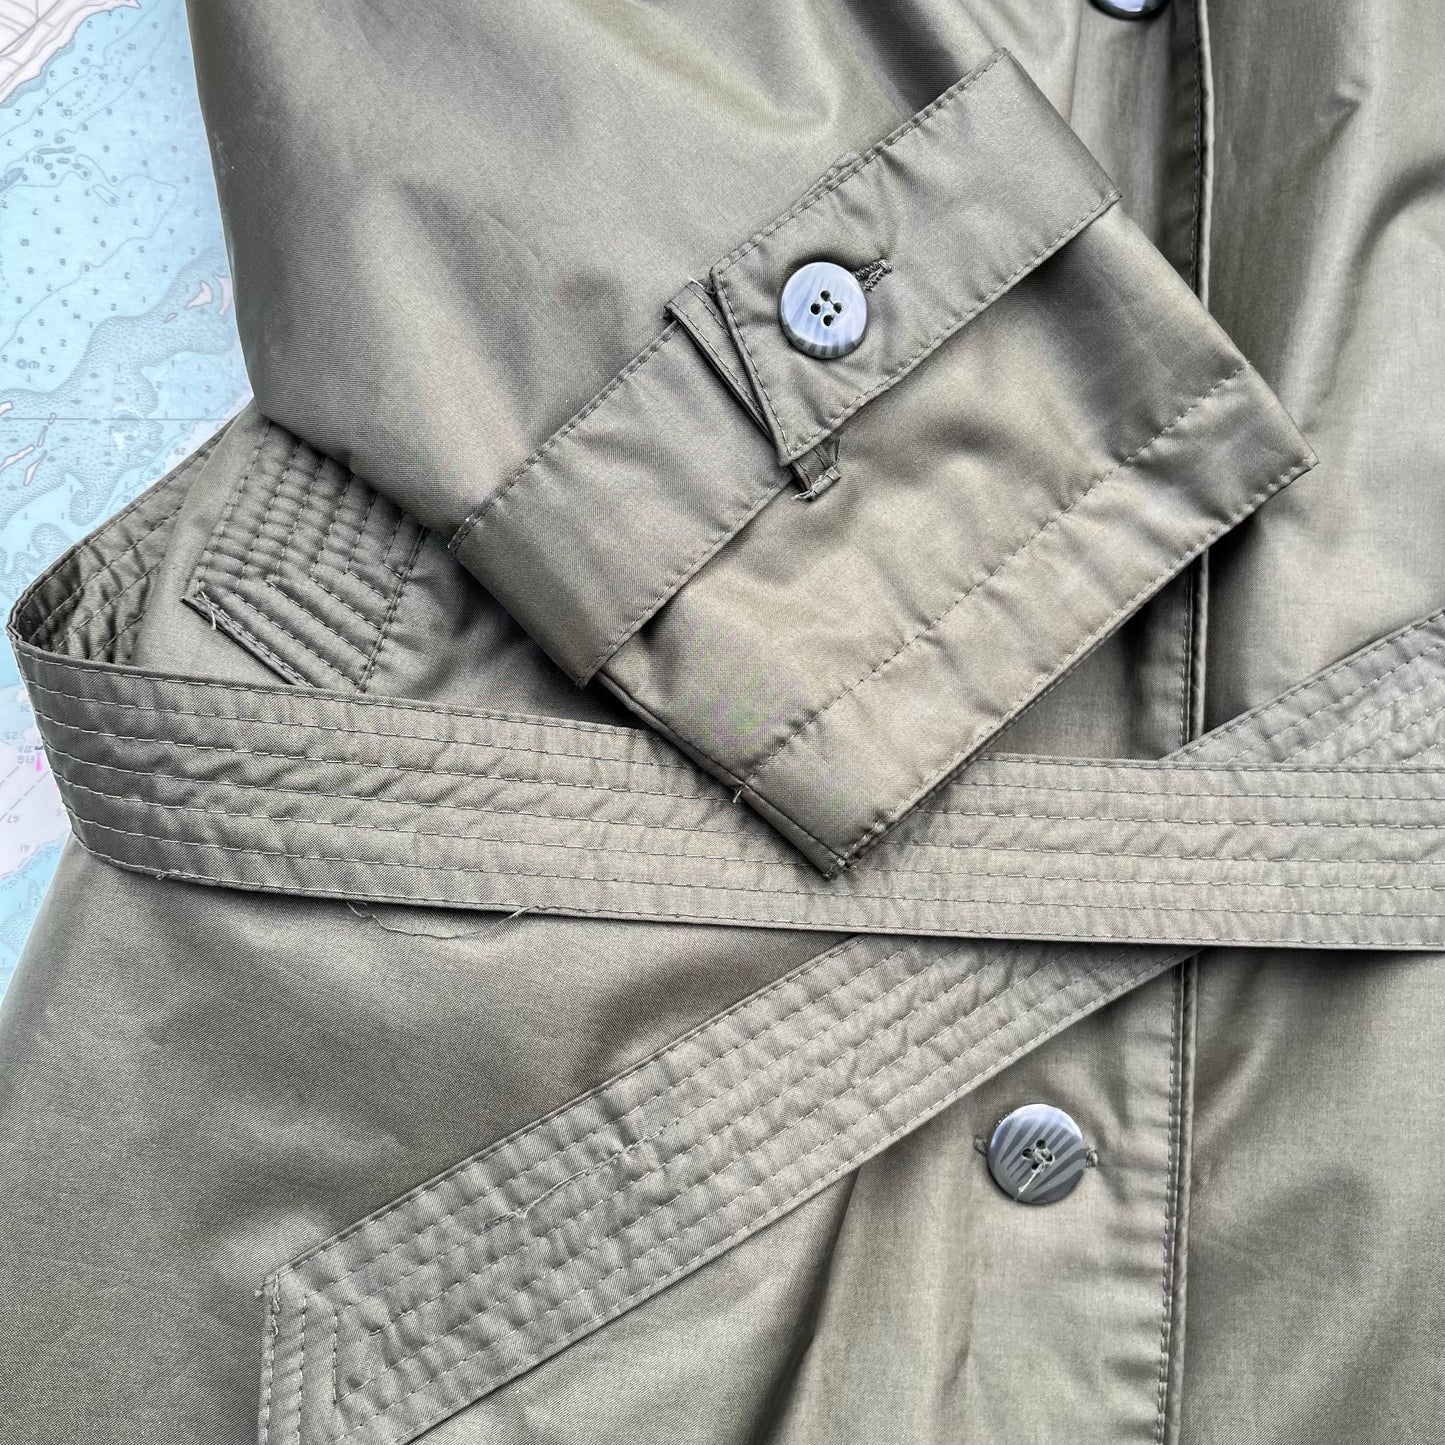 Vintage Weather Wise Olive Trench Coat